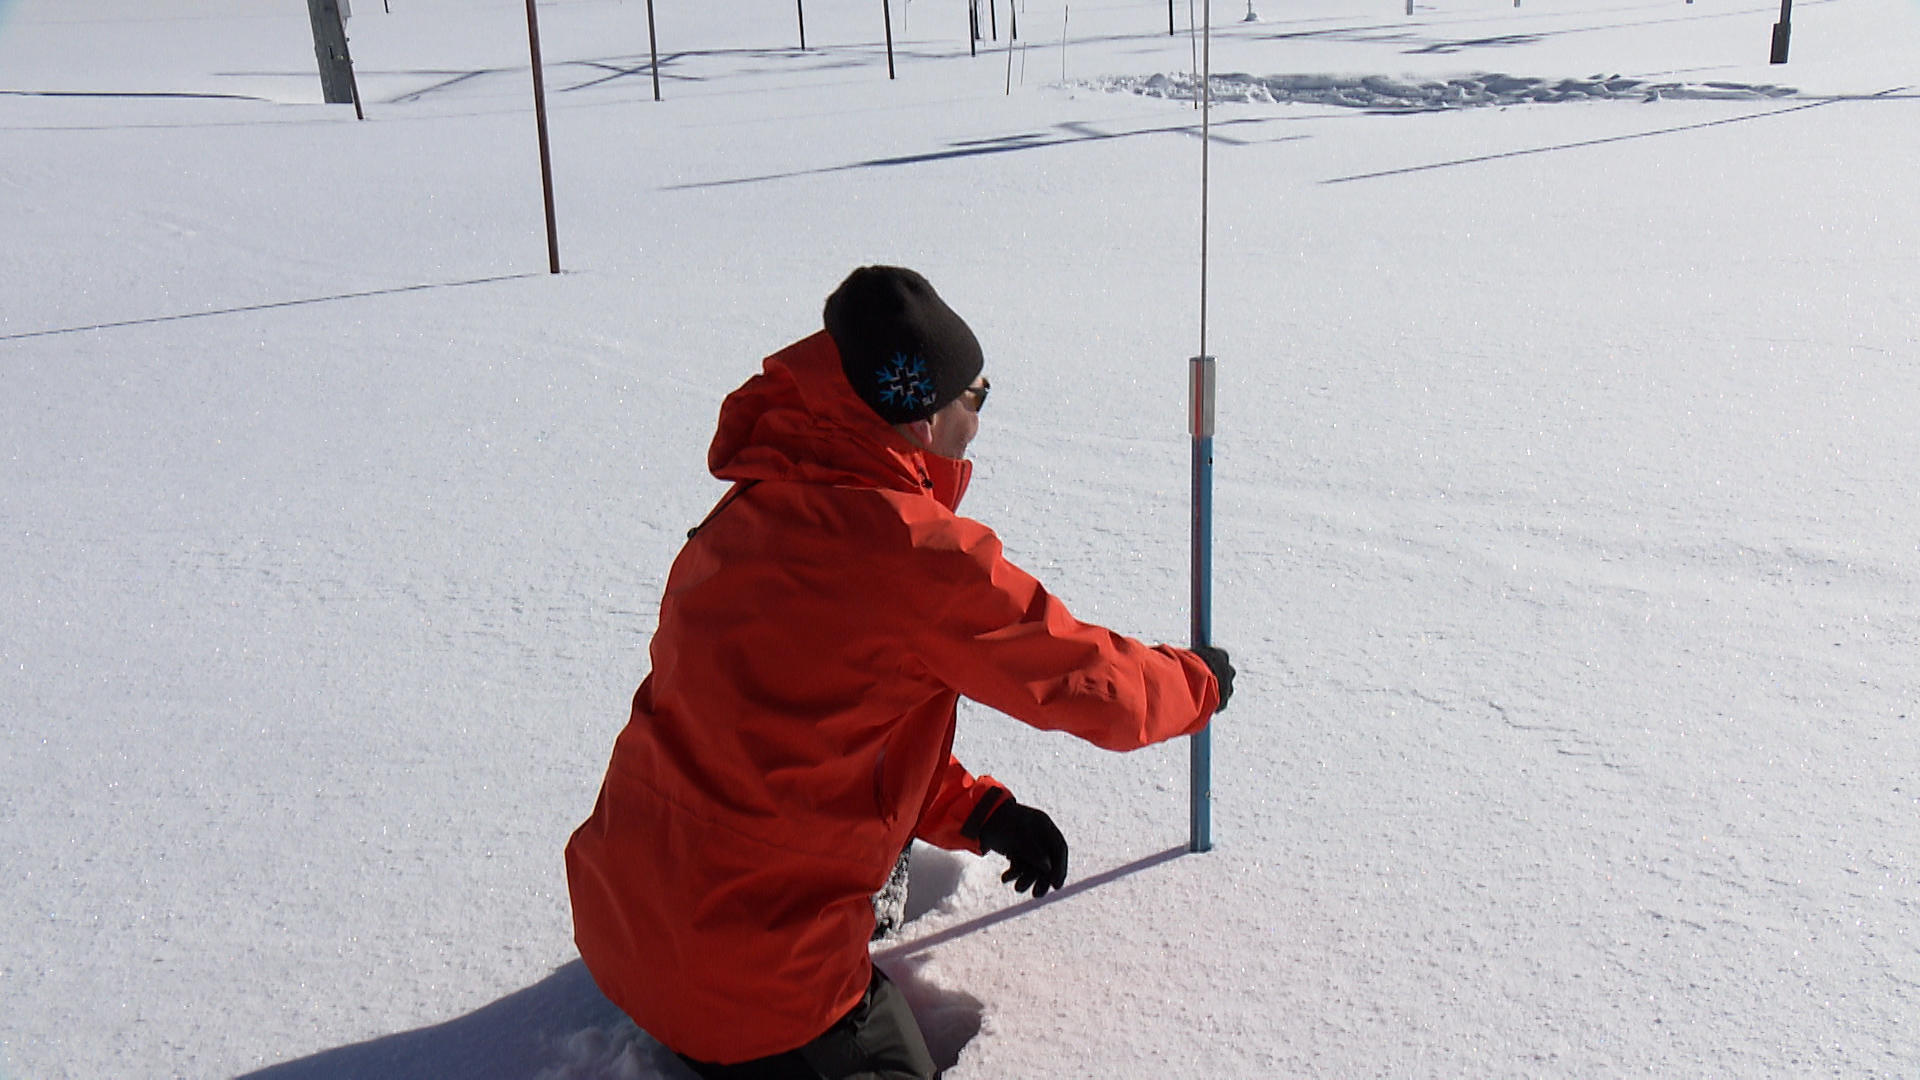 Snow physicist Charles Fierz analyses a snow profile.